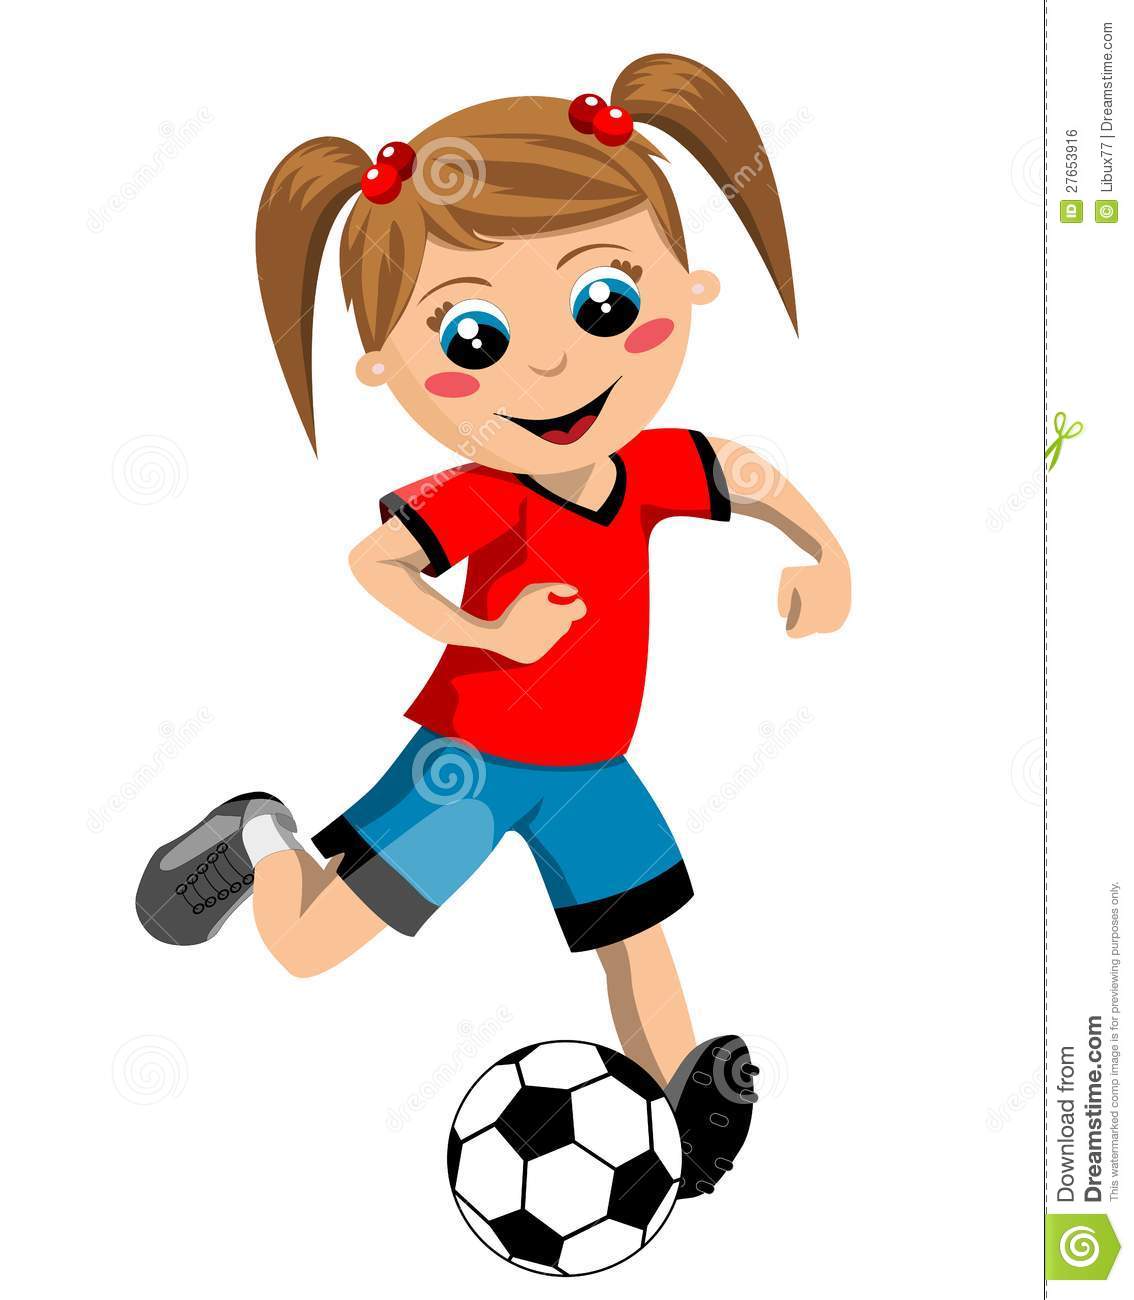 Or Children Playing Sports In My Portfolio  Eps File Is Available